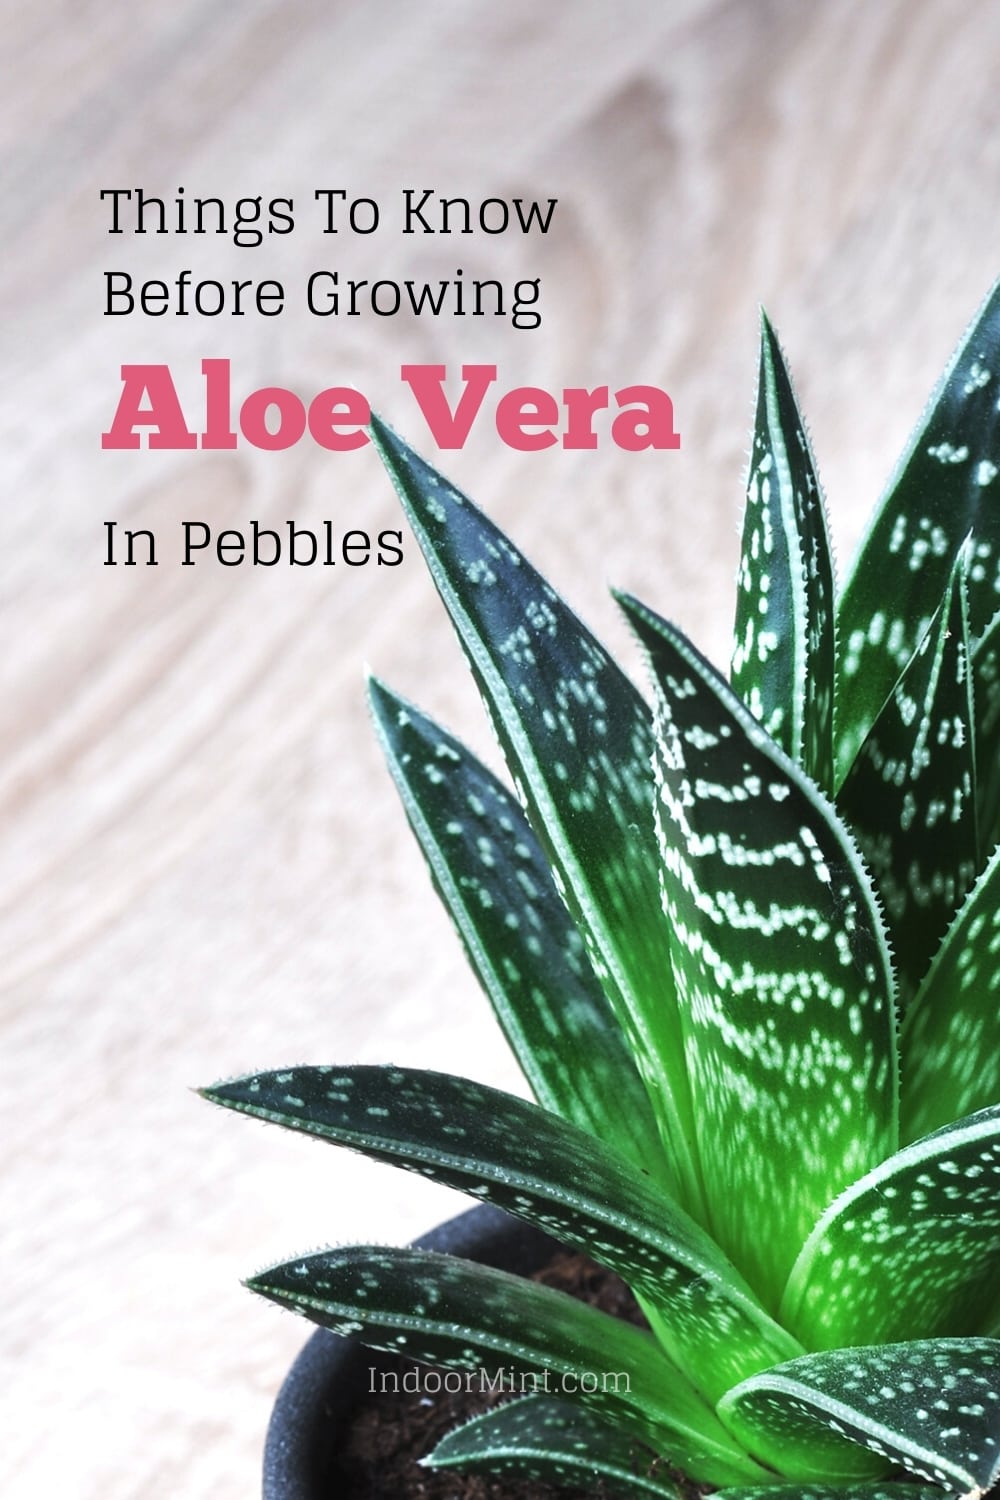 growing aloe vera in pebbles guide cover image